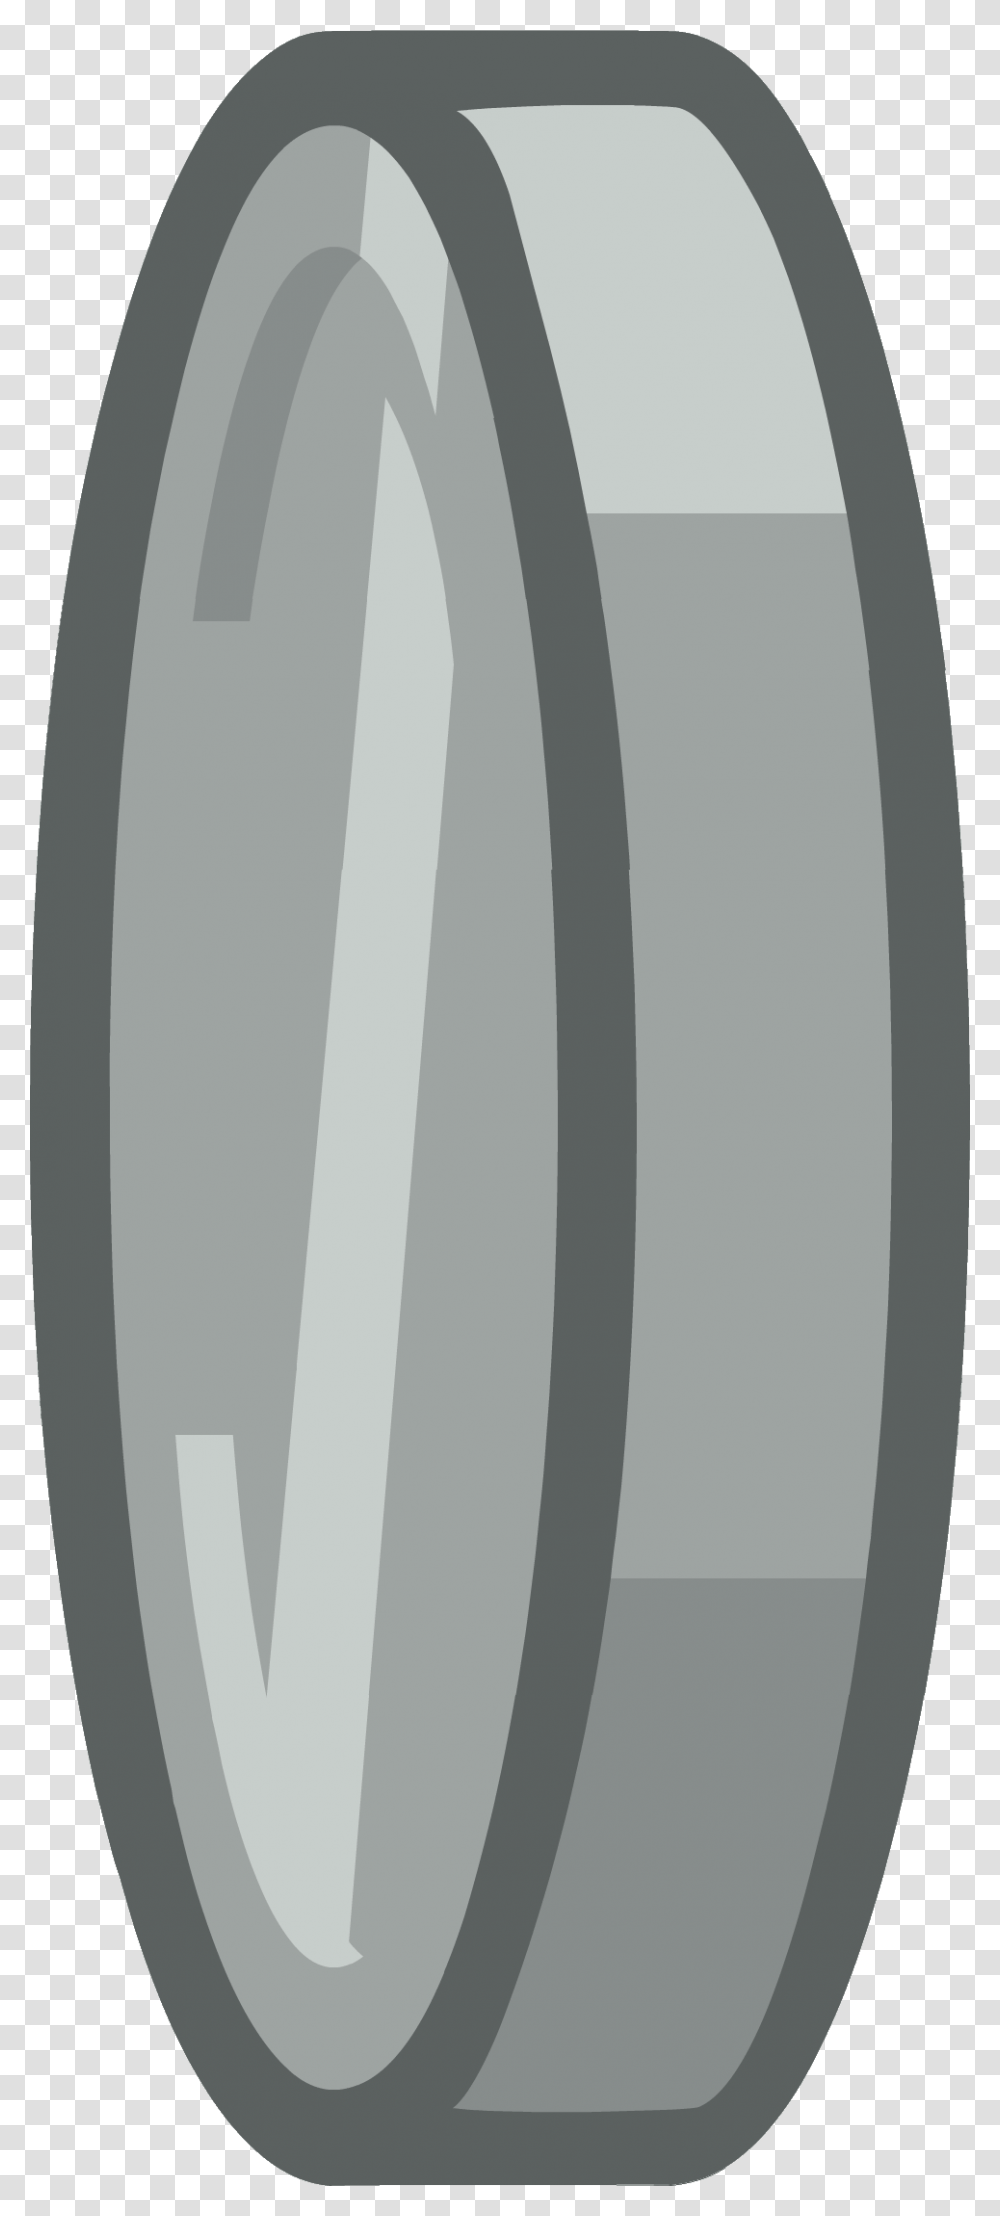 New Nickel Side Nickel Body Side Bfdi, Sea, Outdoors, Water, Nature Transparent Png